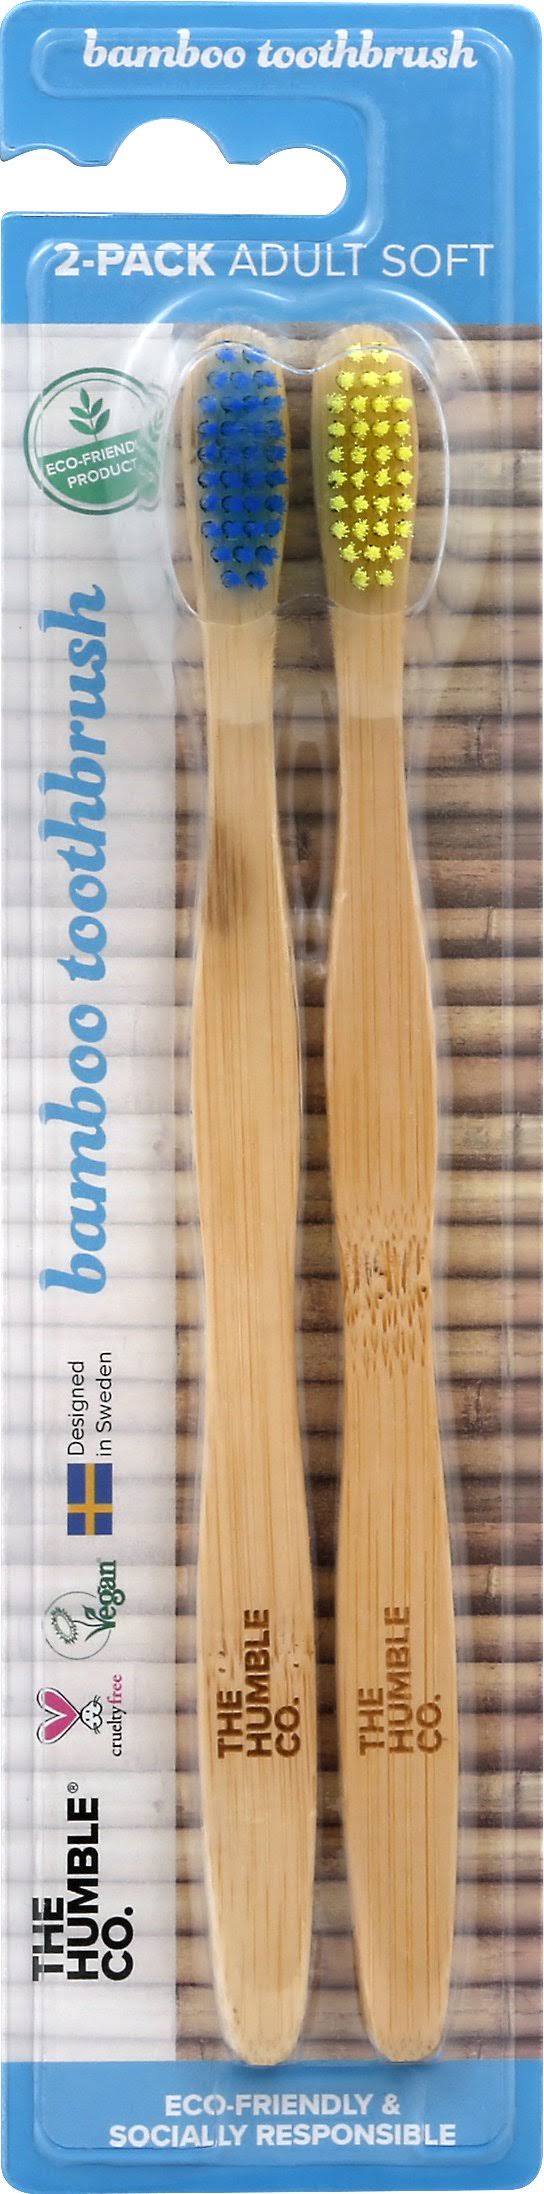 The Humble Co. Toothbrush, Bamboo, Soft, Adult, 2 Pack - 2 toothbrush